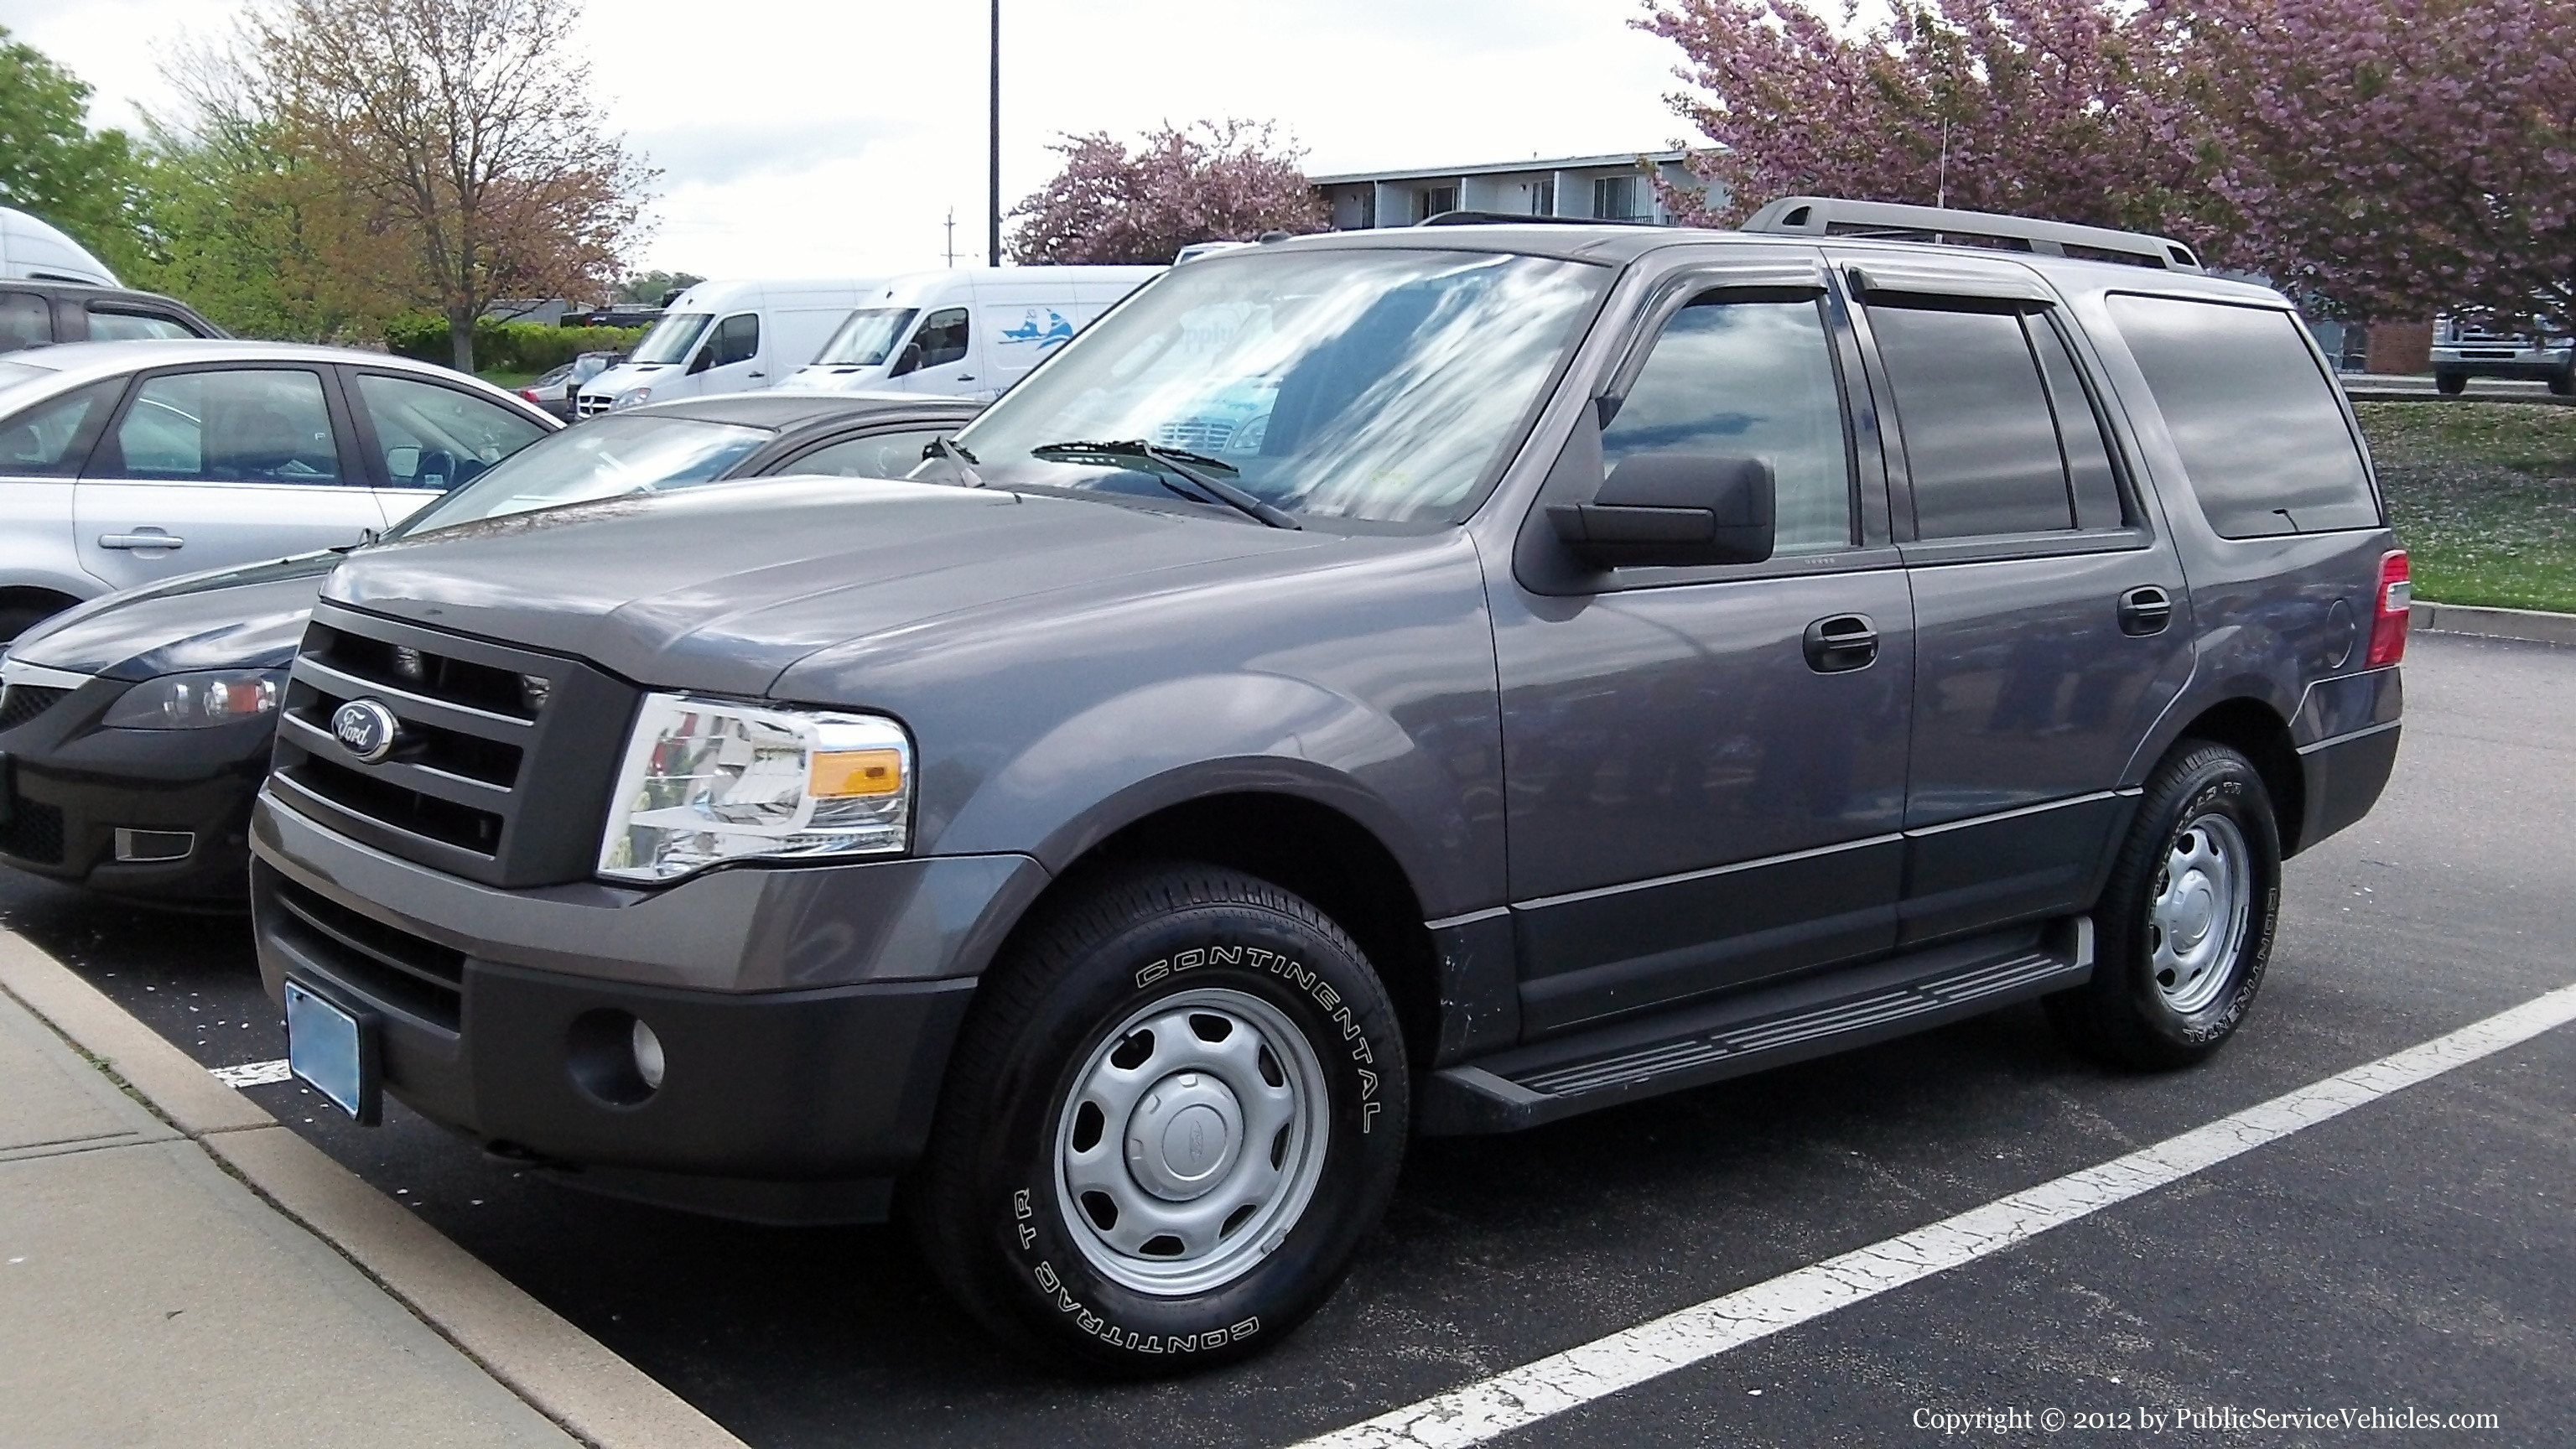 A photo  of Middletown Police
            Cruiser 2131, a 2013 Ford Expedition             taken by Kieran Egan